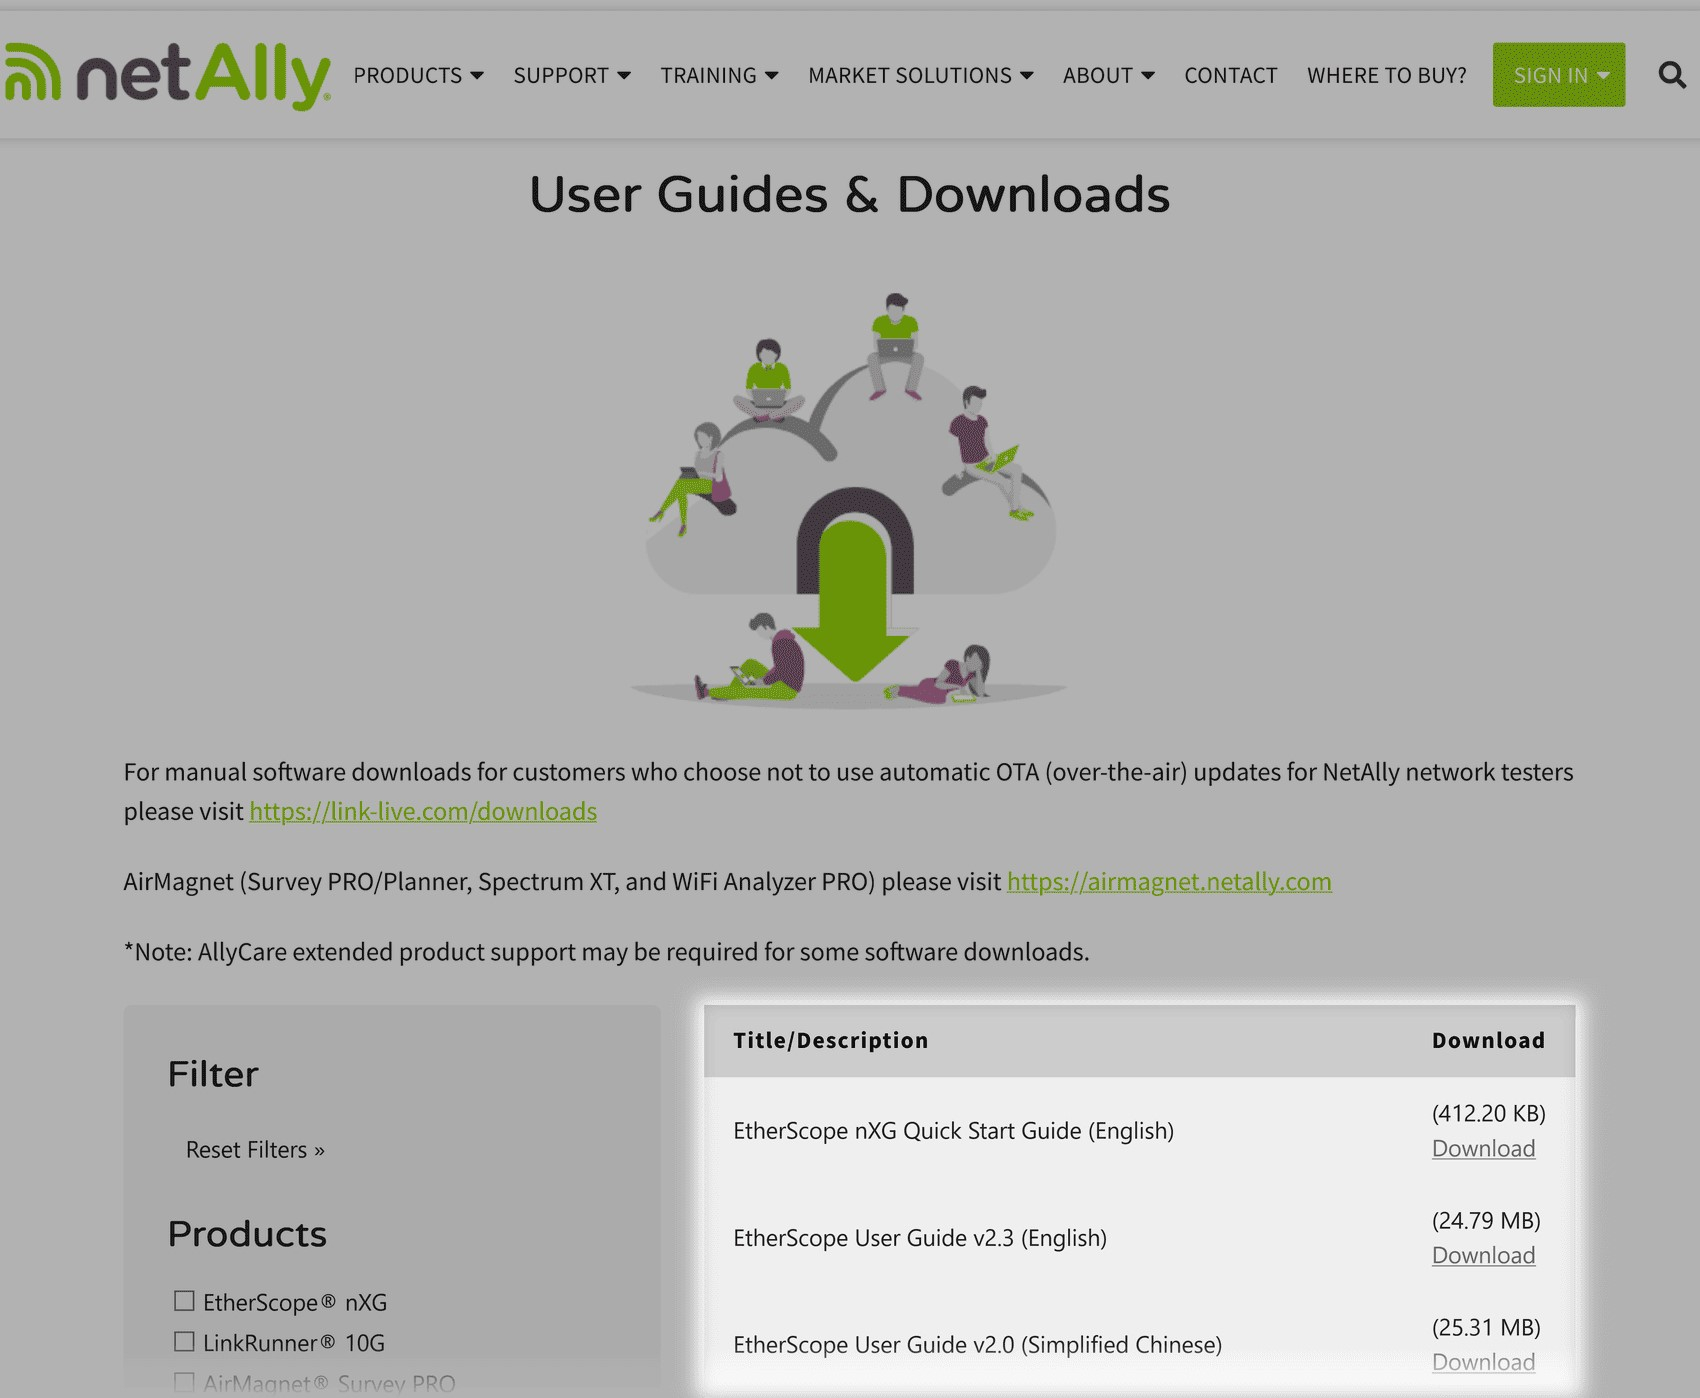 NetAlly's section with user guides